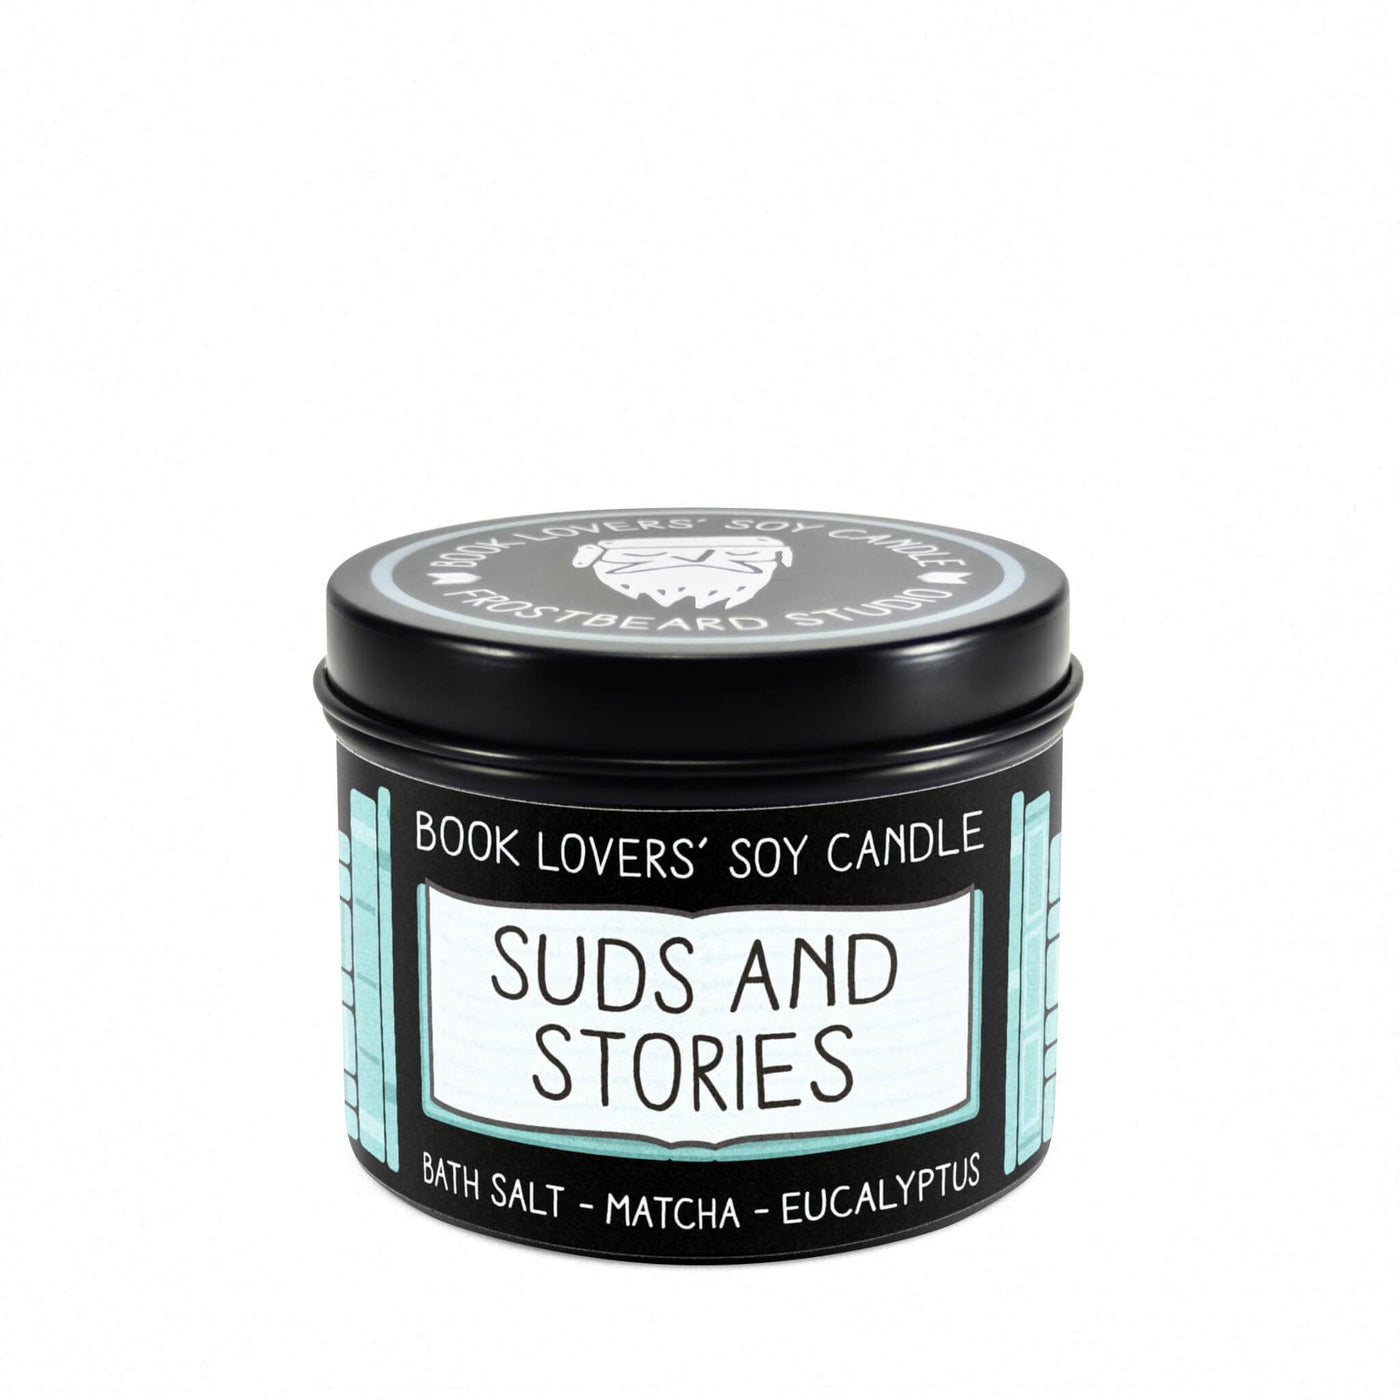 Suds and Stories - 4 oz Tin - Book Lovers' Soy Candle - Frostbeard Studio